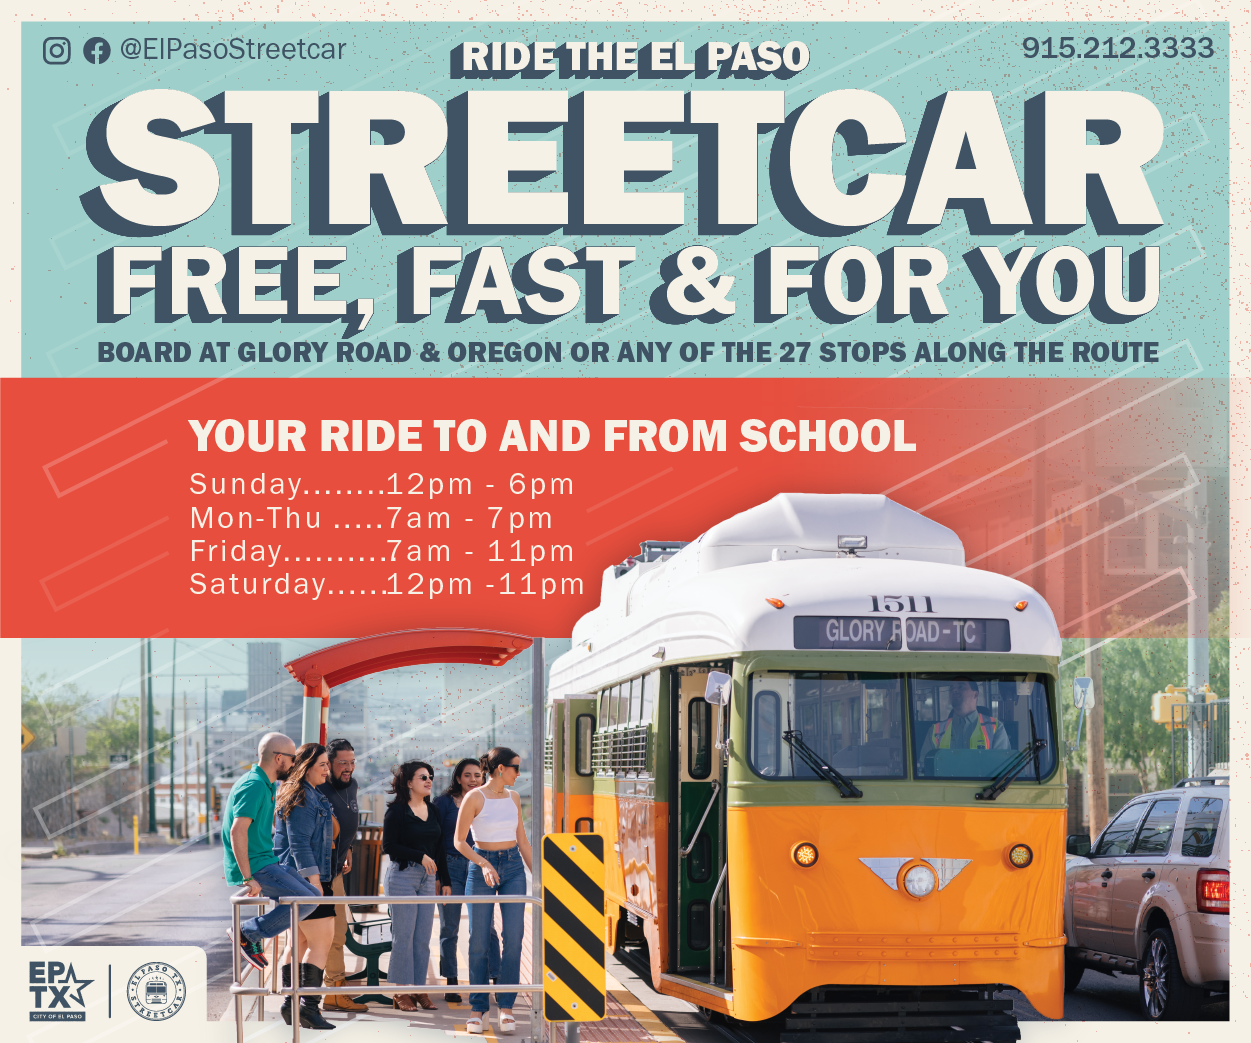 Ride the El Paso StreetCar. Free, Fast and for you. Board at Glory Road and Oregon or any to the 27 stops along the route. Your ride to and from school. Sunday 12 p.m. to 6 p.m. Monday to Thursday 7 a.m. to 7 p.m. Friday 7 a.m. to 11 p.m. Saturday 12 p.m. to 11 p.m. Track the StreetCar Download the Ride Sun Metro App today